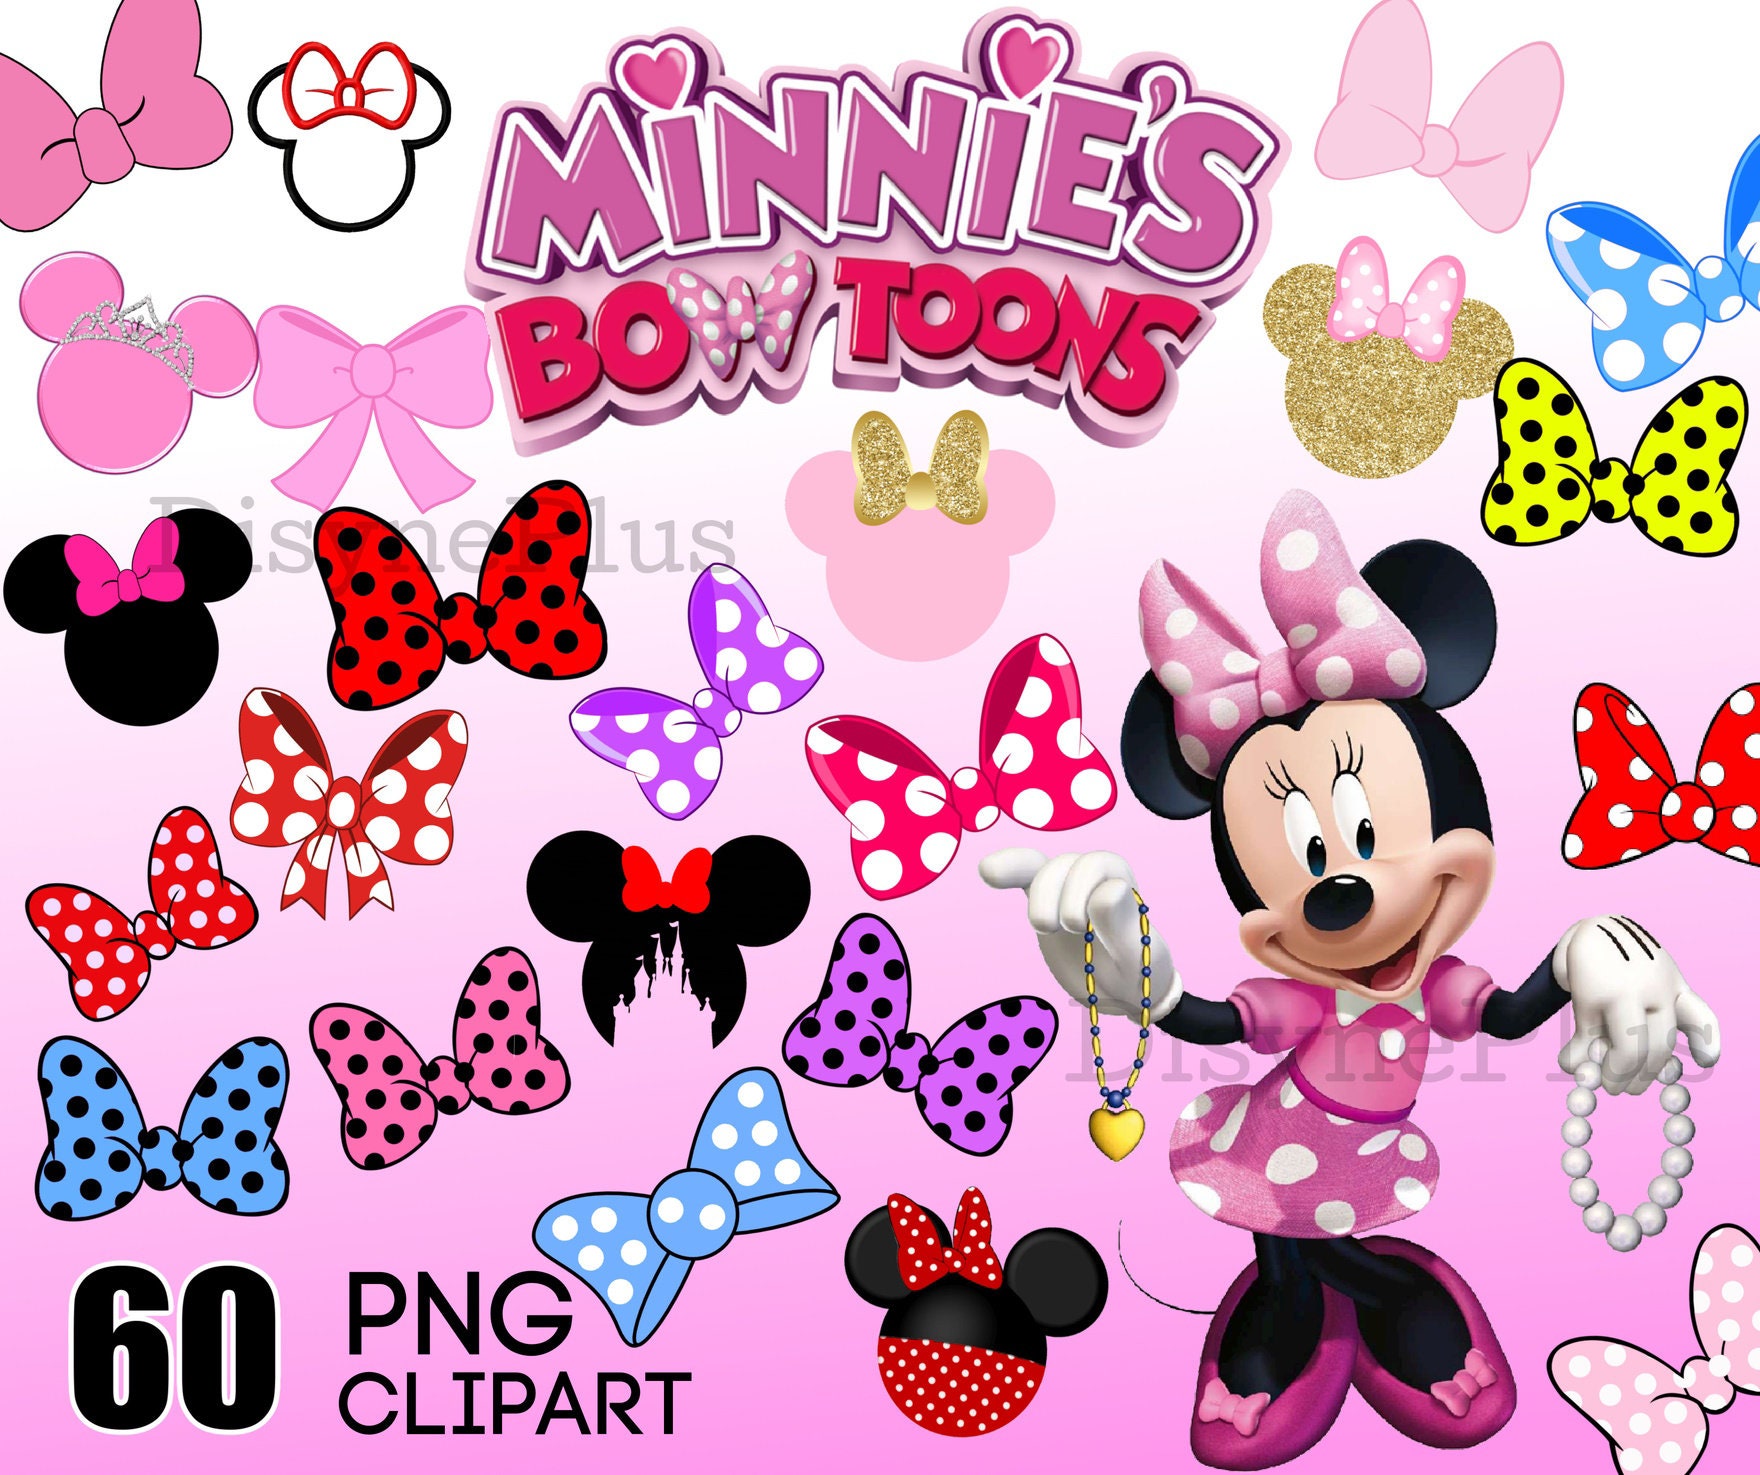 Minnie's Bow-Toons 🎀 